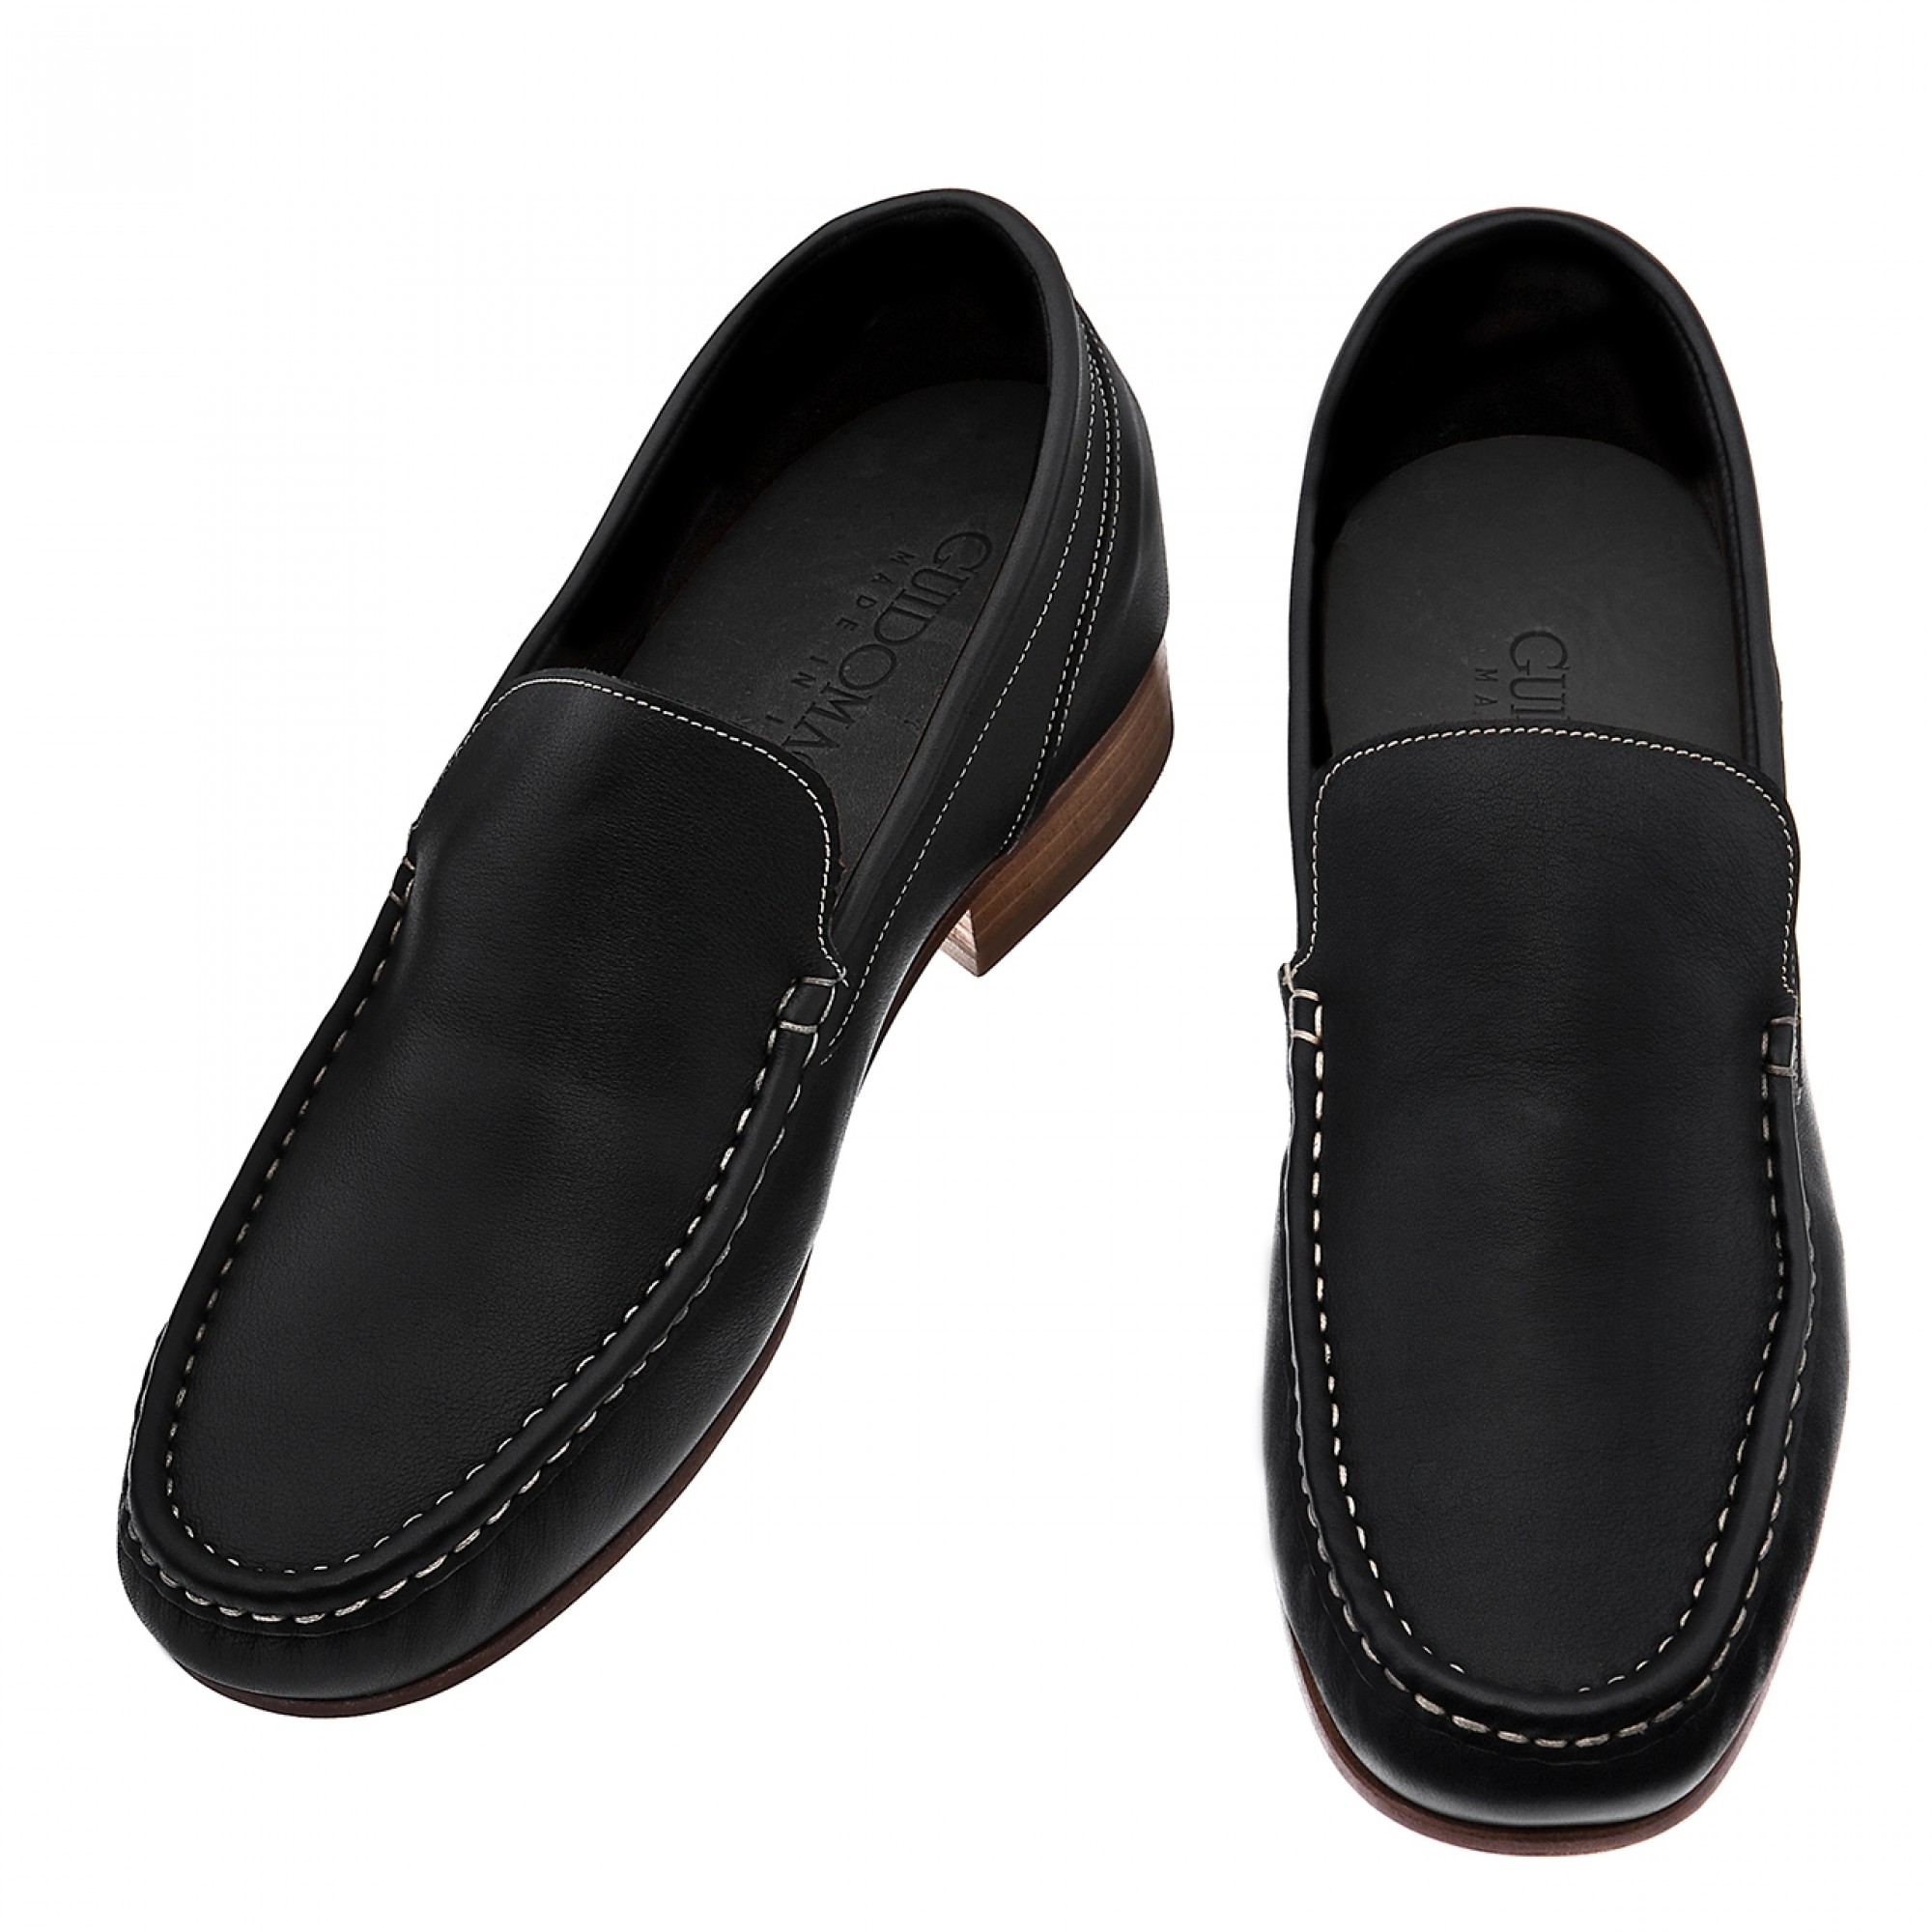 Montana - Elevator Loafers in Full Grain Leather up to 2.6 inches